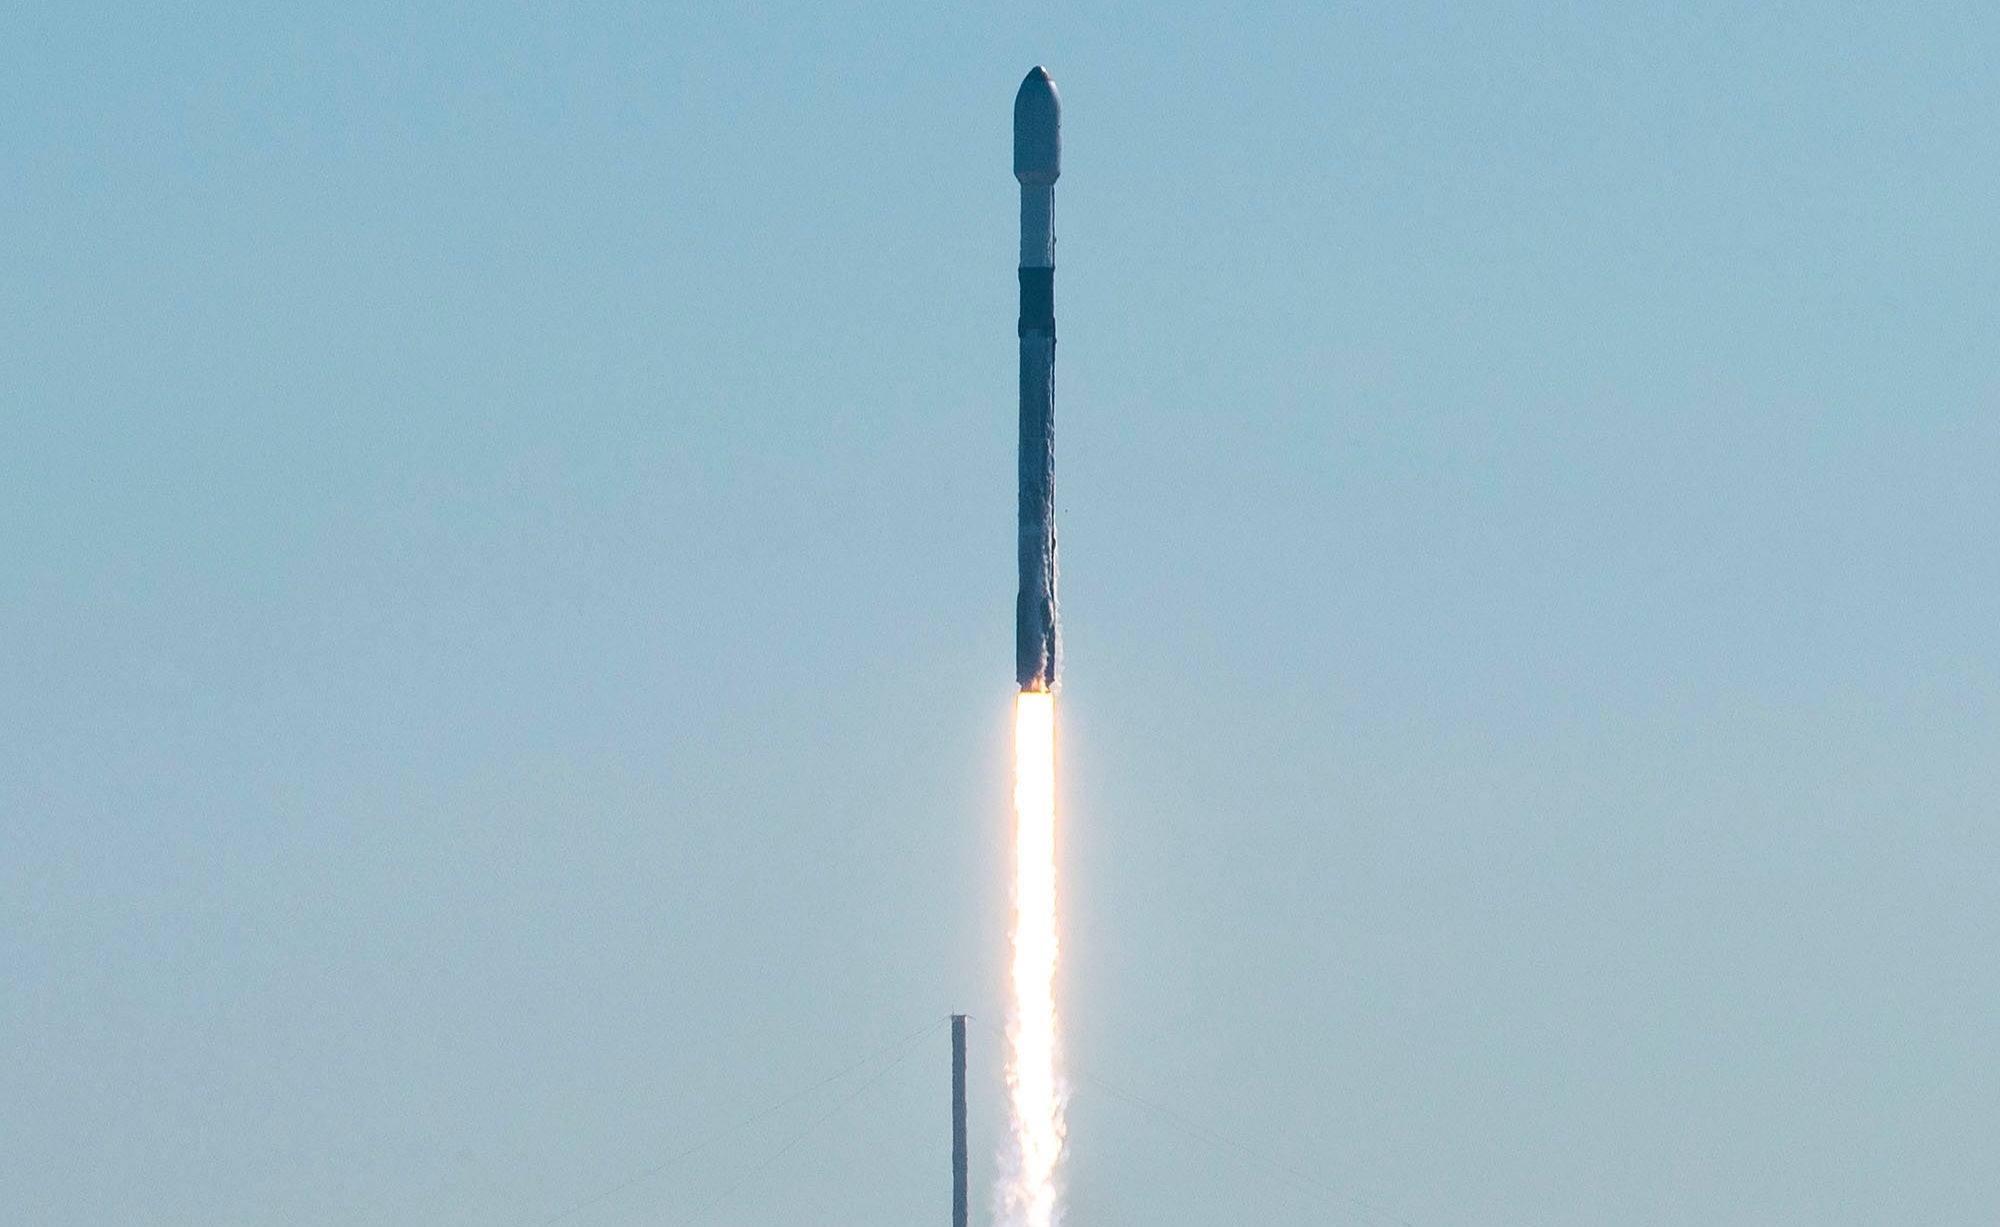 SpaceX veteran Falcon 9 rocket conducts eleventh flight to deploy Starlink satellites